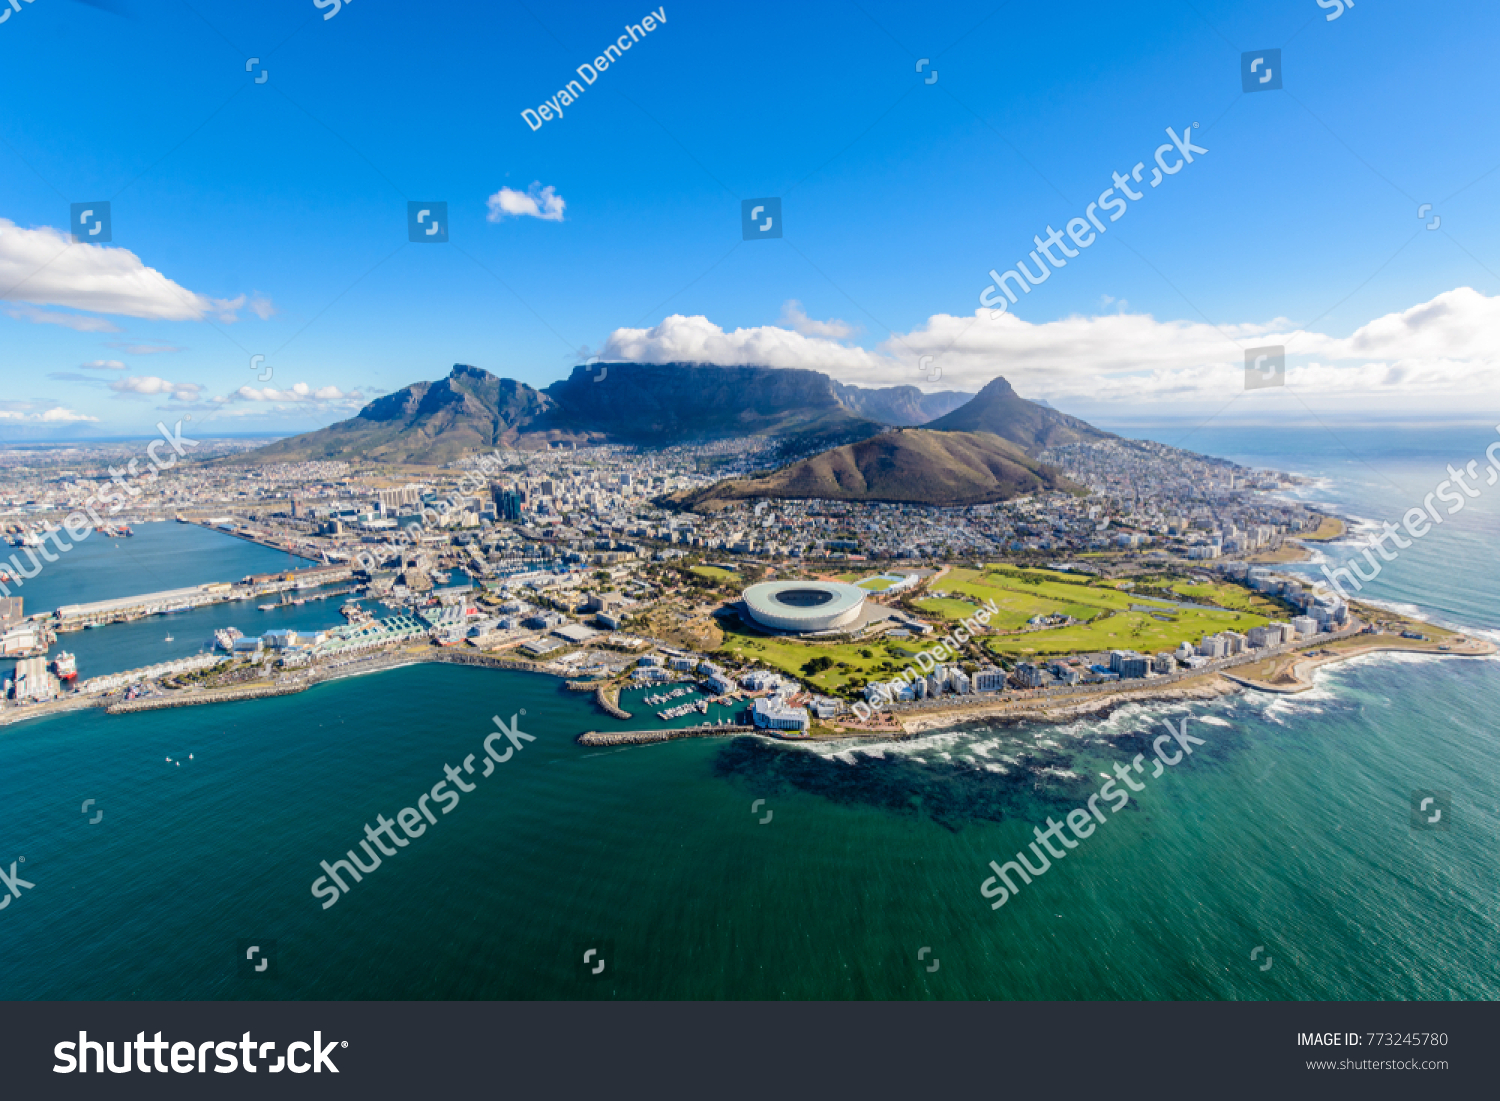 Aerial view of Cape Town, South Africa on a sunny afternoon. Photo taken from a helicopter during air tour of Cape Town #773245780